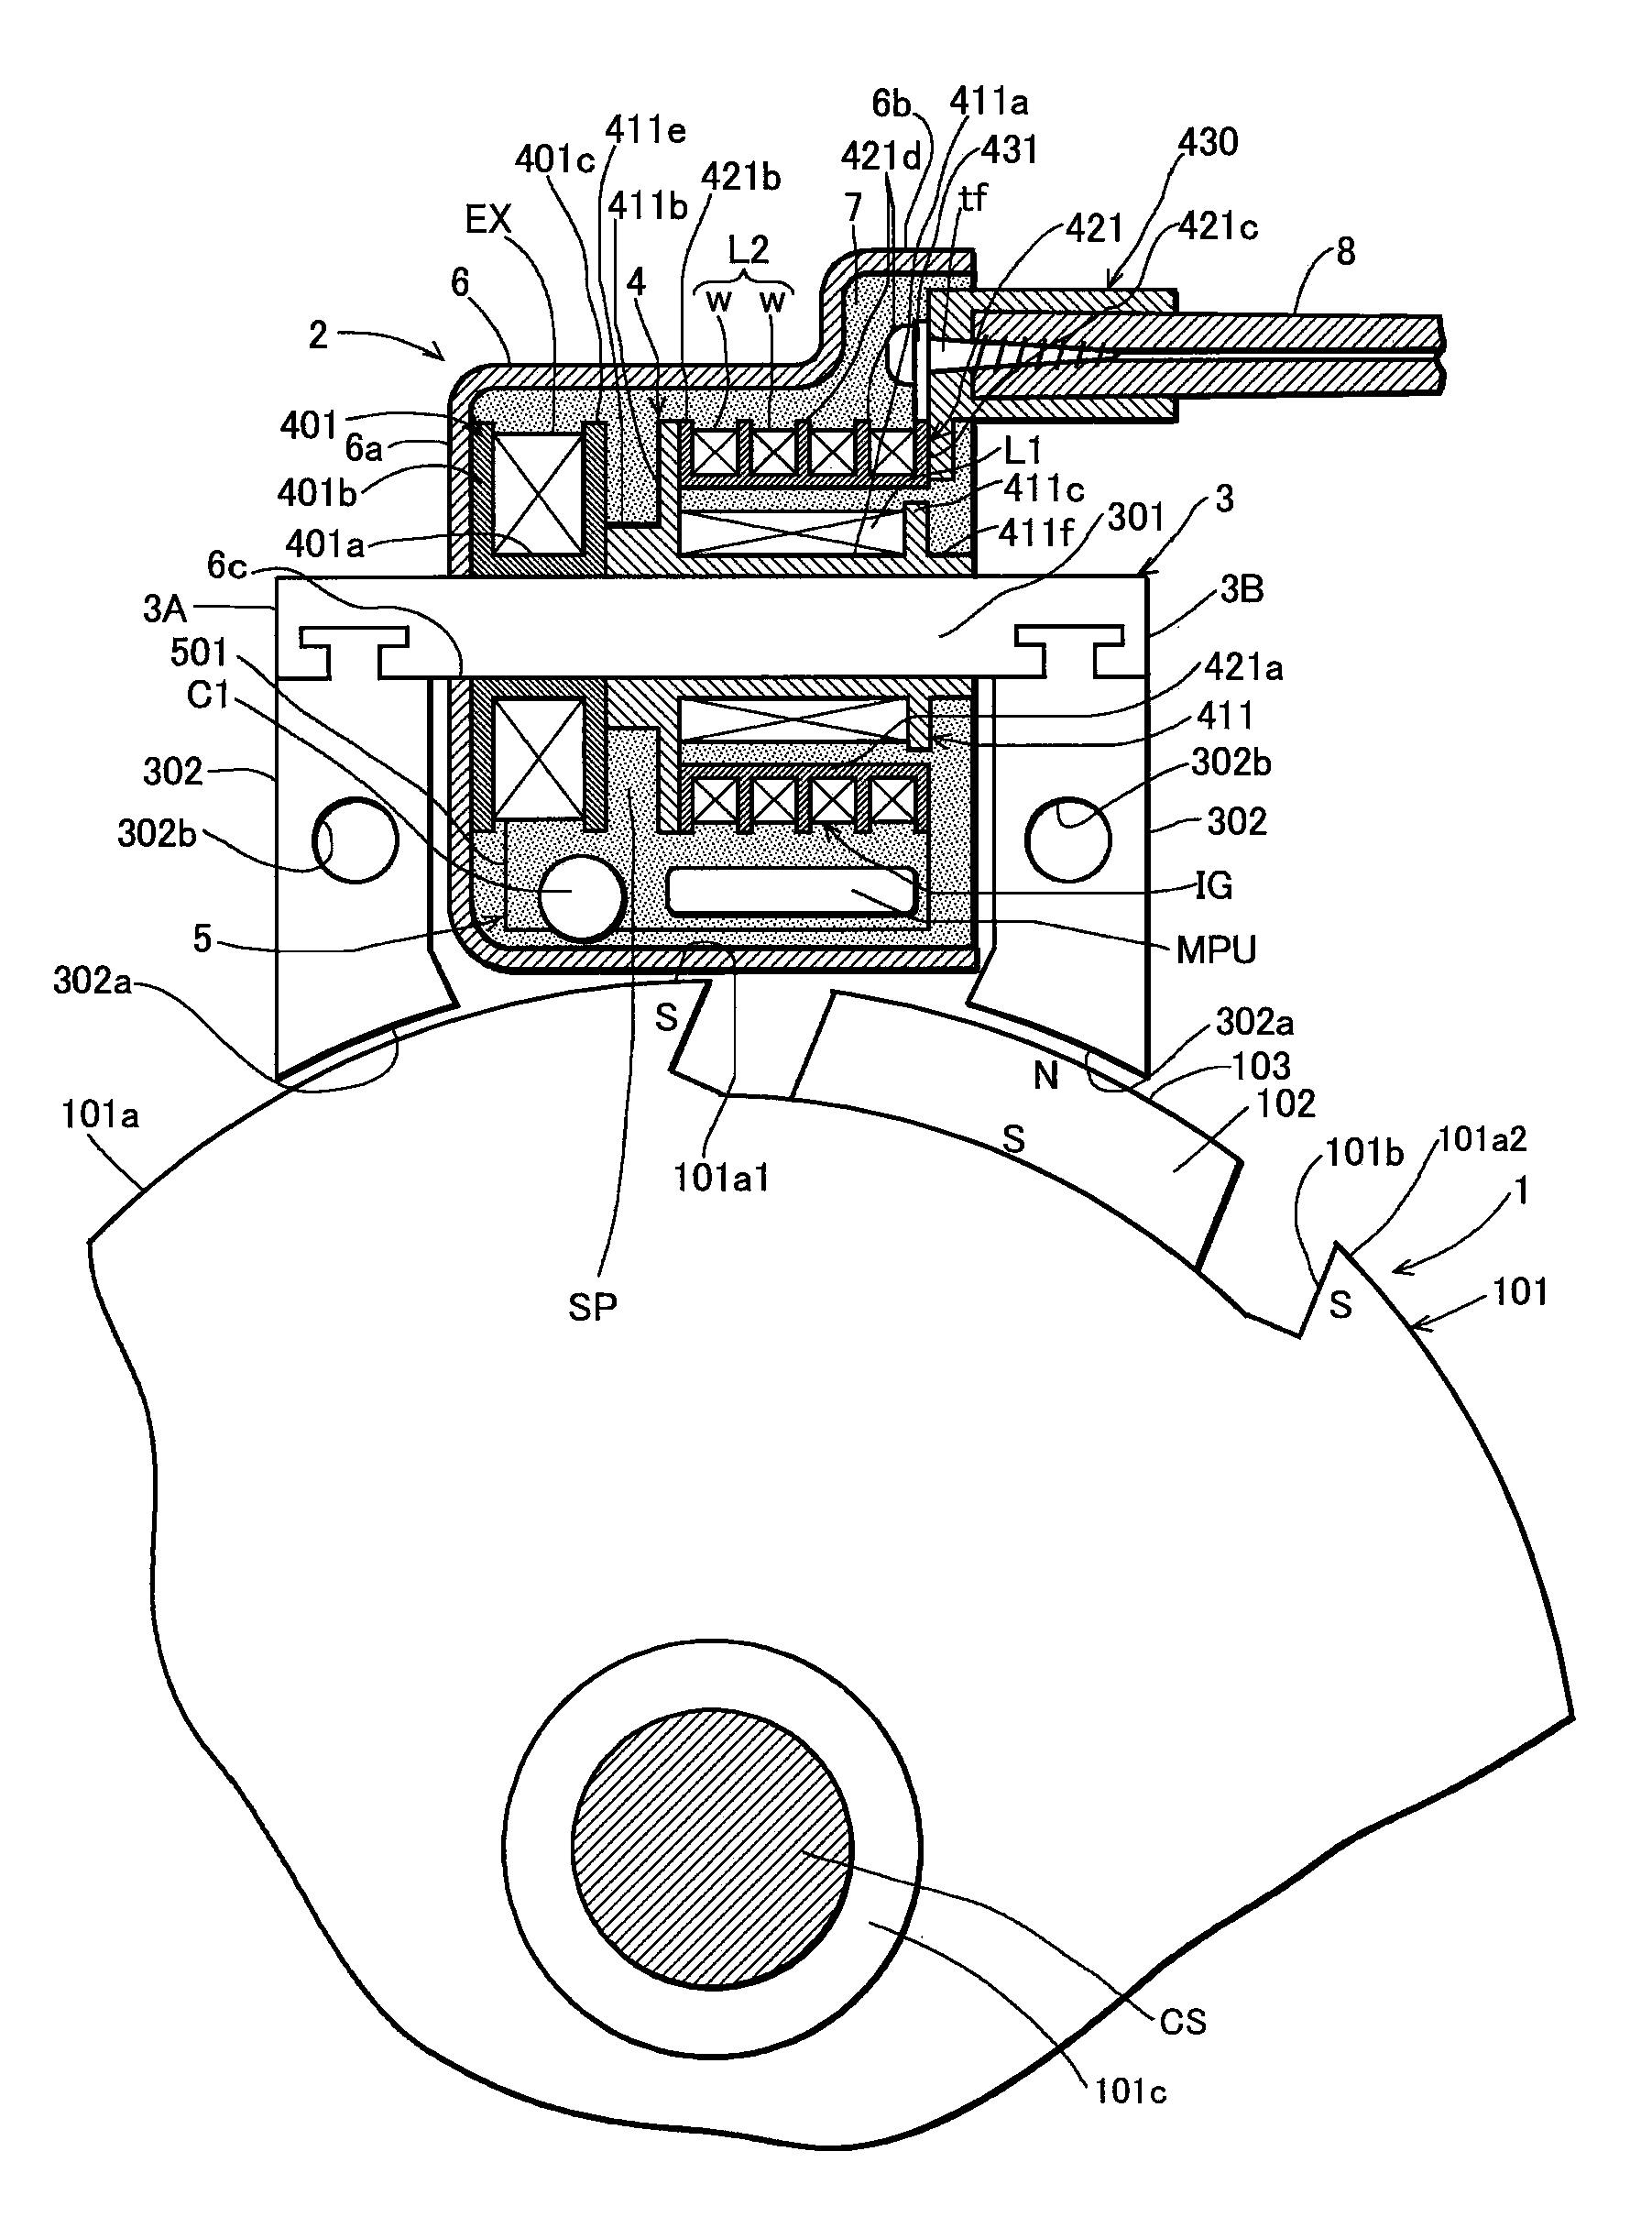 Capacitor discharge engine ignition device